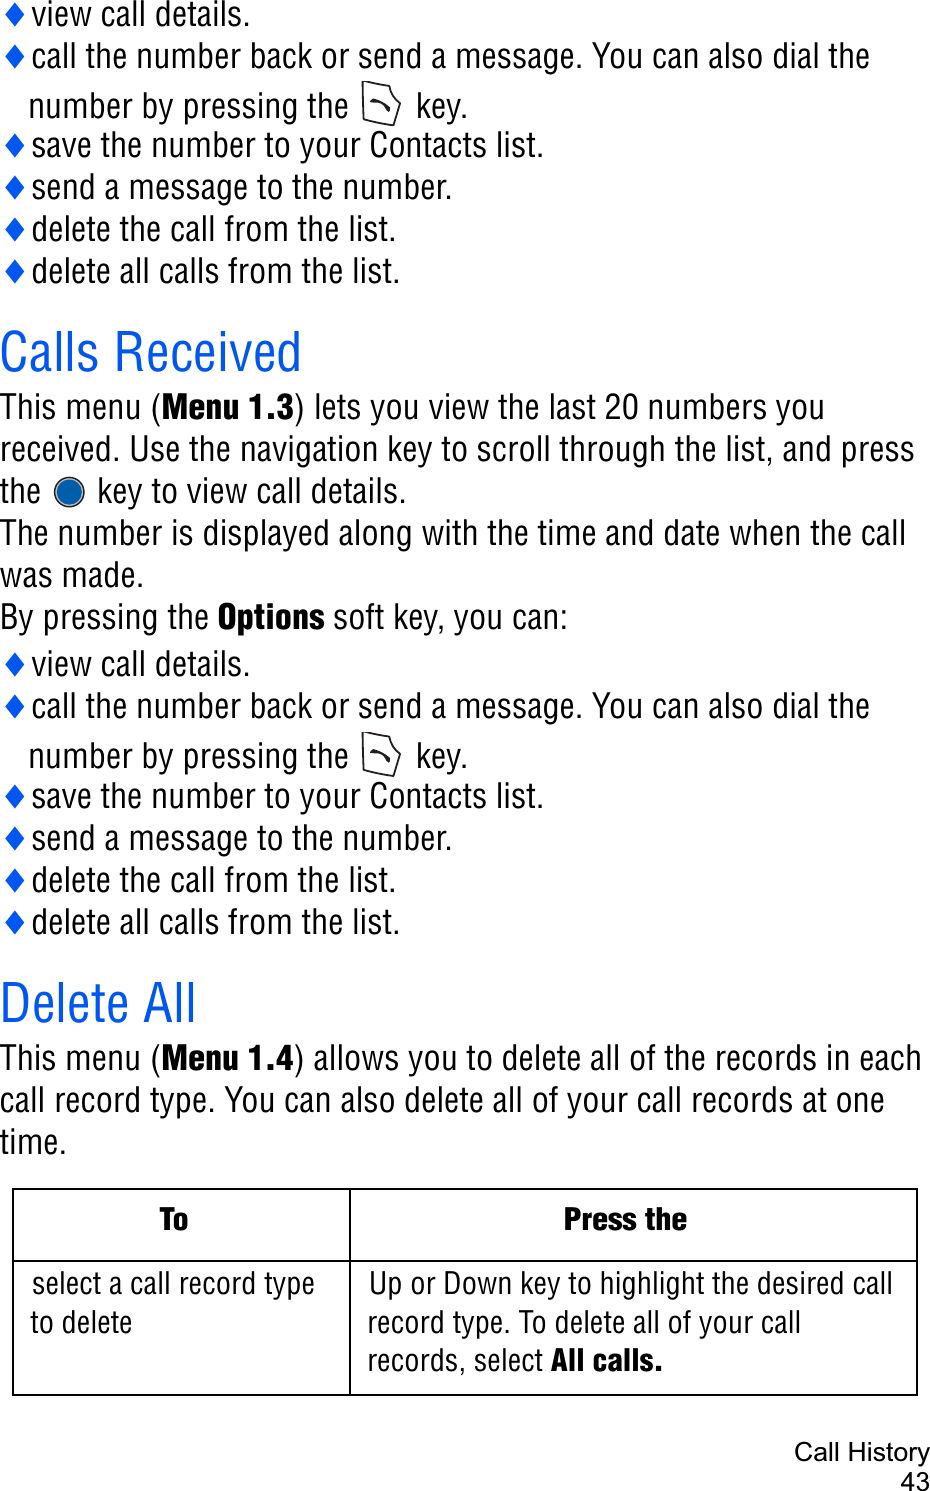 Call History43iview call details.icall the number back or send a message. You can also dial the number by pressing the  key.isave the number to your Contacts list.isend a message to the number.idelete the call from the list.idelete all calls from the list.Calls ReceivedThis menu (Menu 1.3) lets you view the last 20 numbers you received. Use the navigation key to scroll through the list, and press the   key to view call details.The number is displayed along with the time and date when the call was made. By pressing the Options soft key, you can:iview call details.icall the number back or send a message. You can also dial the number by pressing the  key.isave the number to your Contacts list.isend a message to the number.idelete the call from the list.idelete all calls from the list.Delete AllThis menu (Menu 1.4) allows you to delete all of the records in each call record type. You can also delete all of your call records at one time.To Press theselect a call record type to deleteUp or Down key to highlight the desired call record type. To delete all of your call records, select All calls.